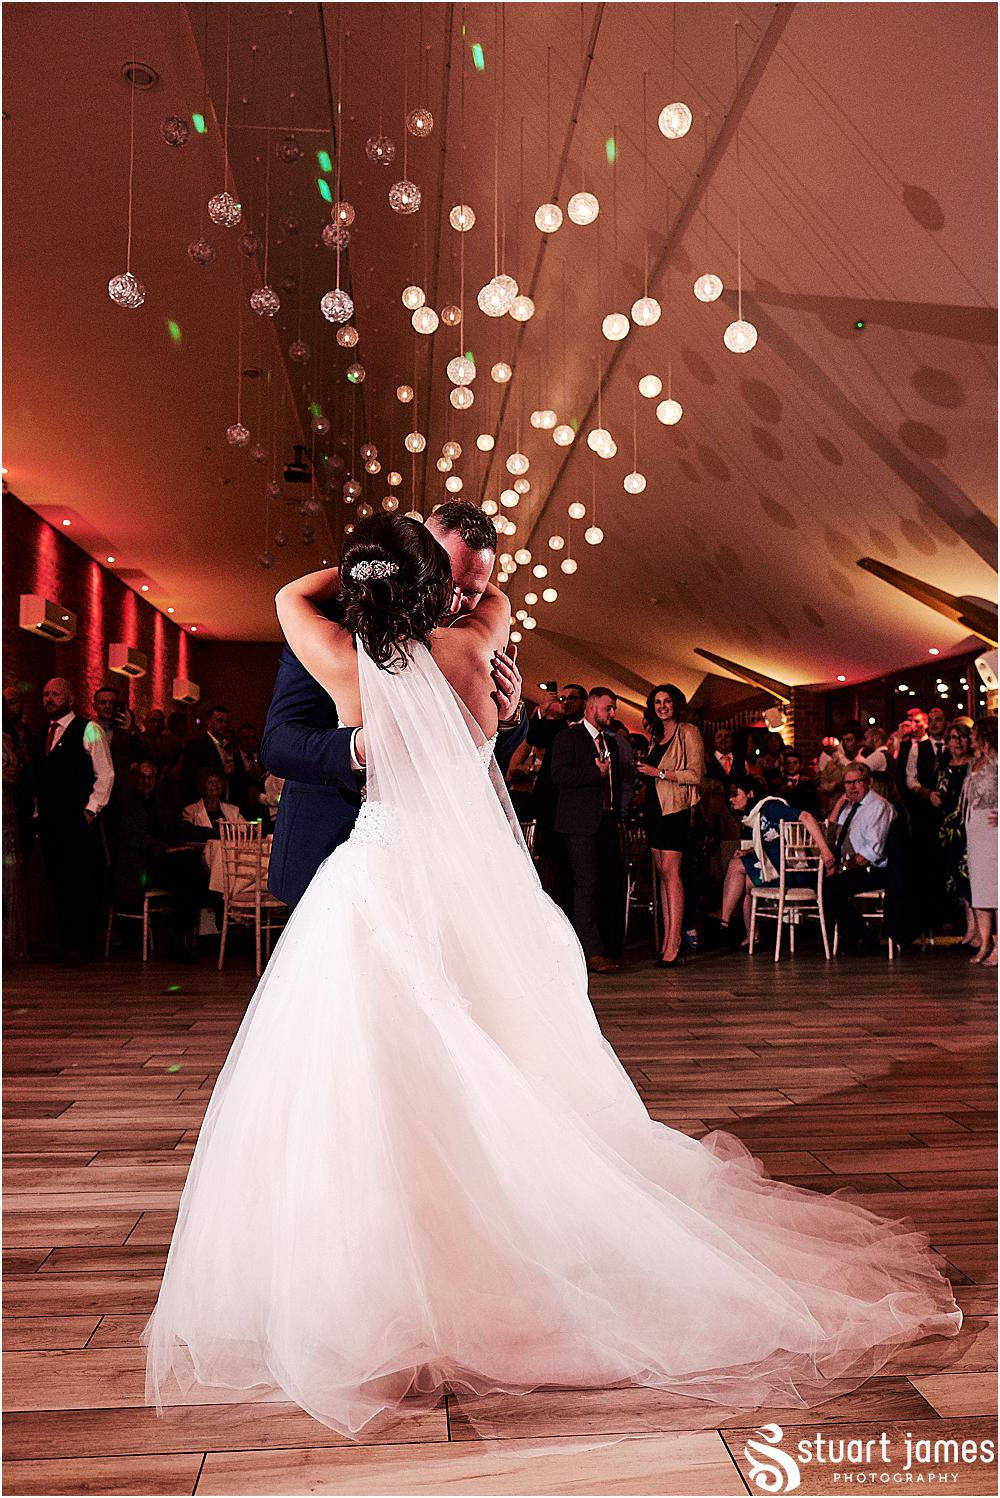 Bride and Groom enjoy their first dance under fairly lights, photo by Stuart James Photography at Aston Marina, Stone